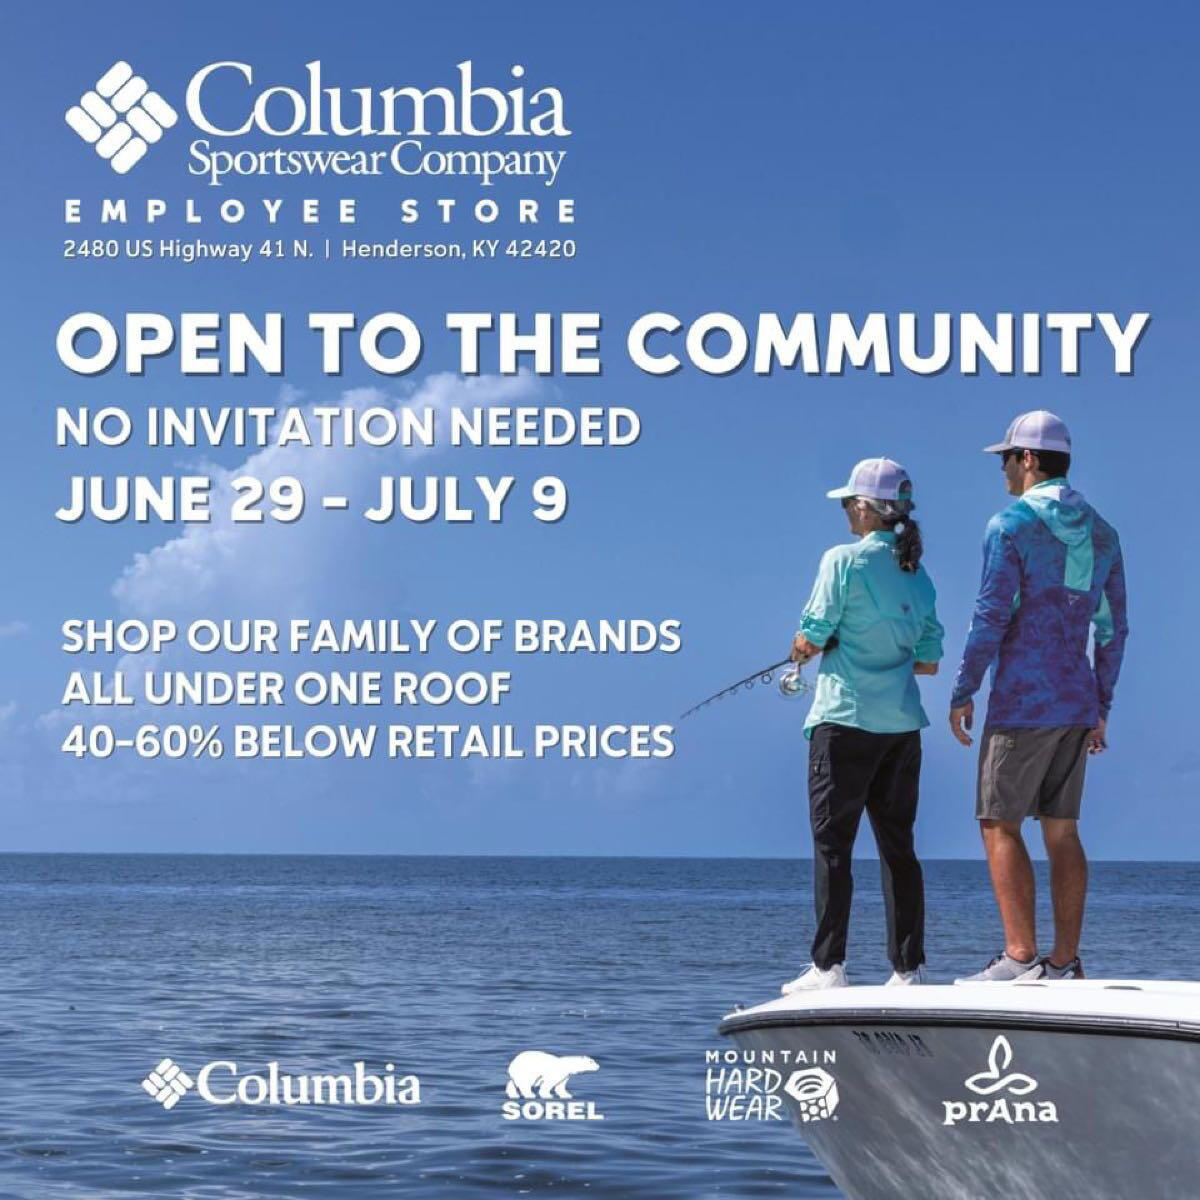 The Columbia Sportswear Employee Store in Henderson is OPEN TO THE ...